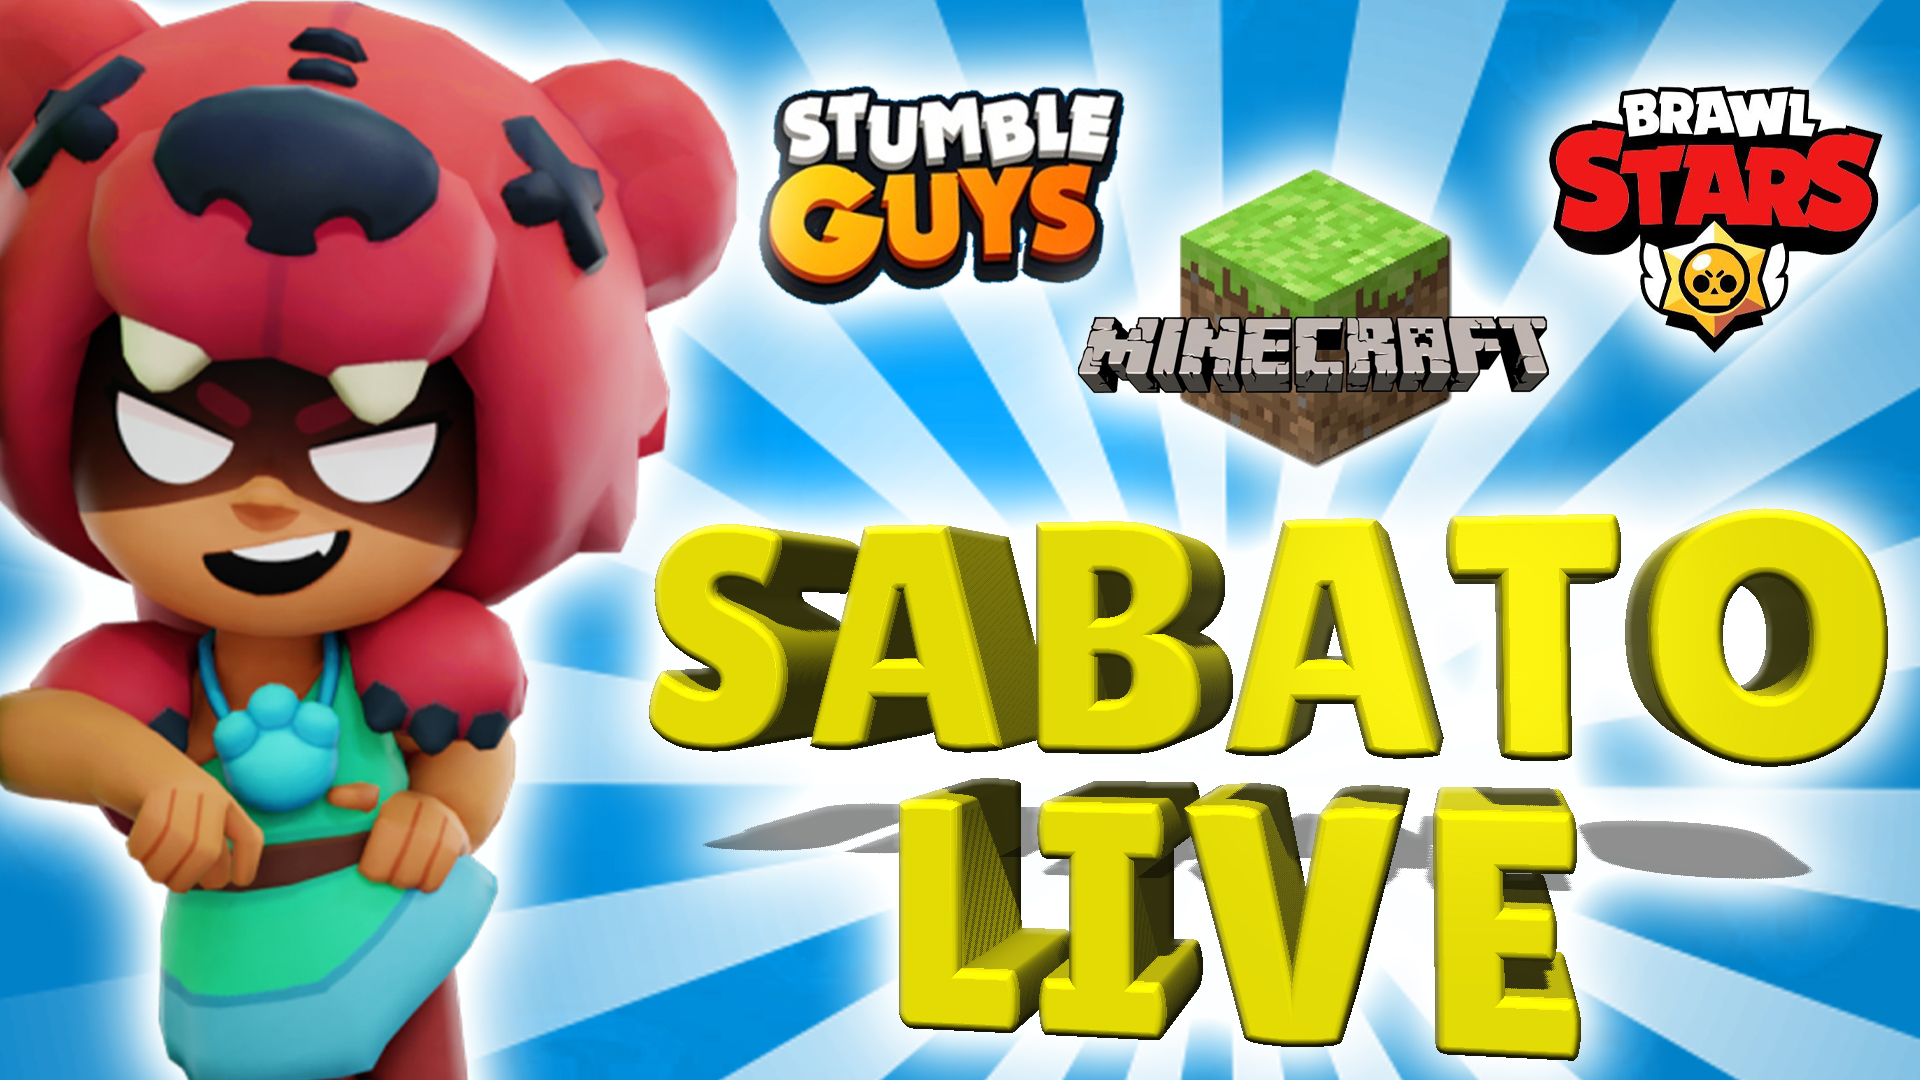 Today Super Live On Youtube To Have Fun With Brawl Stars Stumble Guys And Minecraft - brawls stars foto yutuber